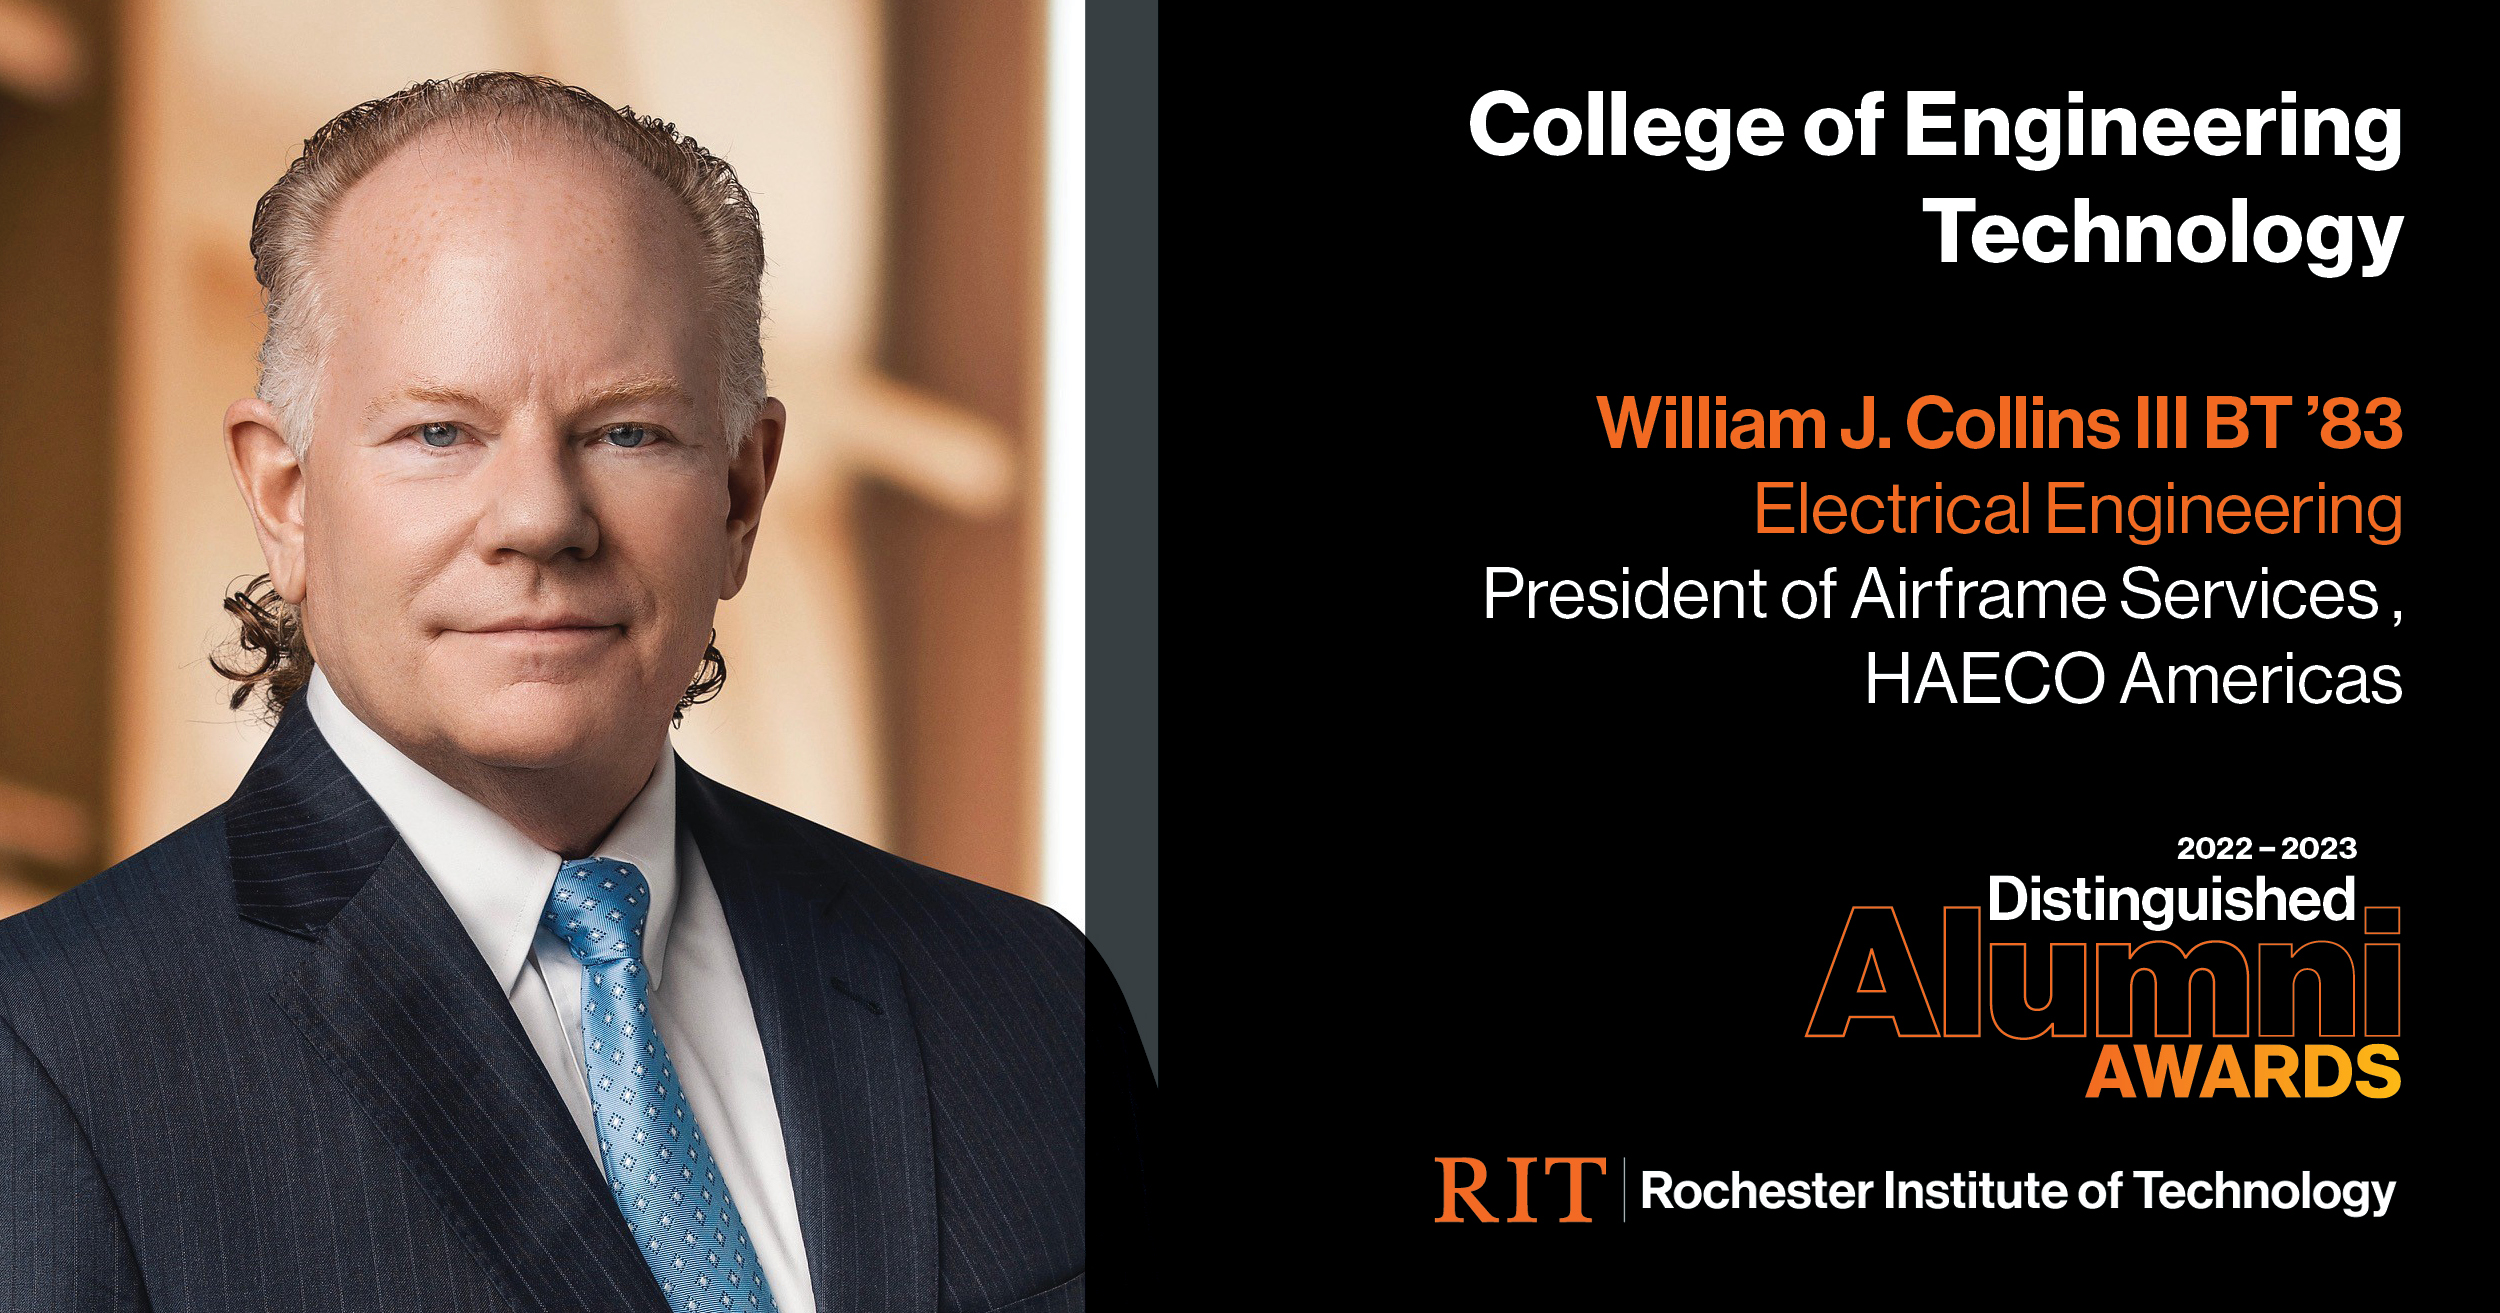 Image on Left: Head shot William J. Collins III  Text on RIght: College of Engineering Technology William J. Collins III BT '83 Electrical Engineering, President, HAECO 2022-2023 Alumni Awards RIT | Rochester Institute of Technology